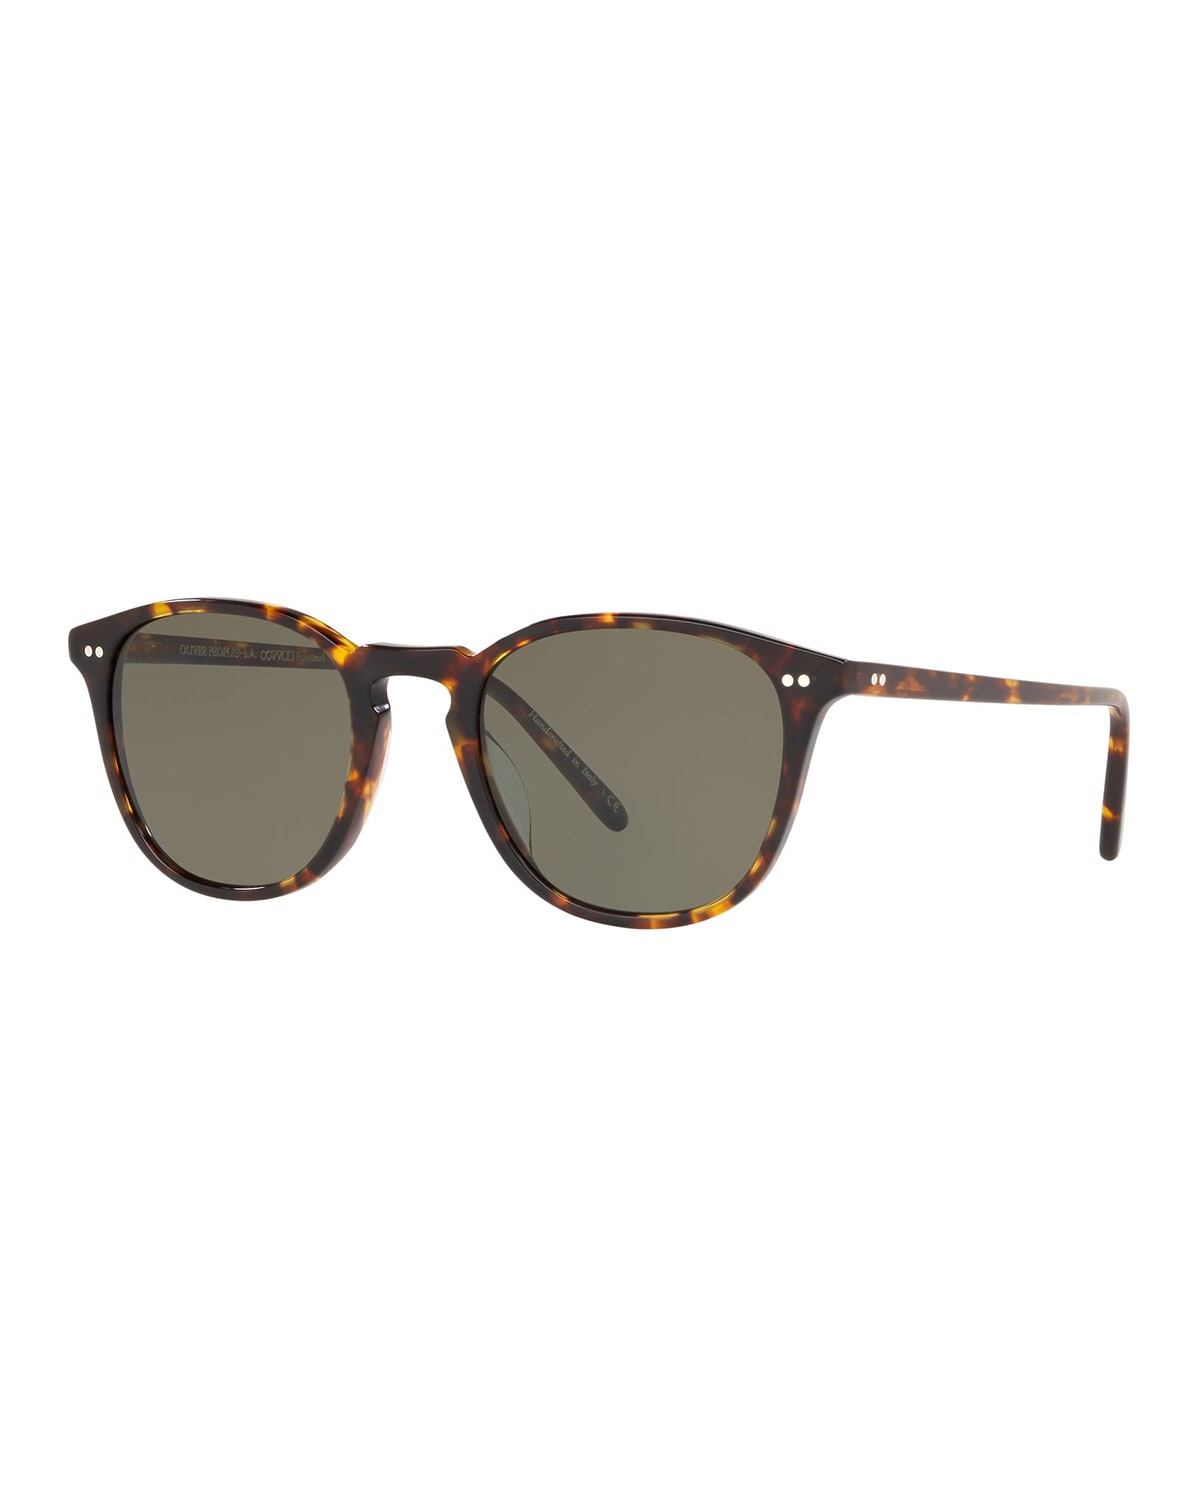 Oliver Peoples Forman Square Polarized Sunglasses In Brown Tortoise